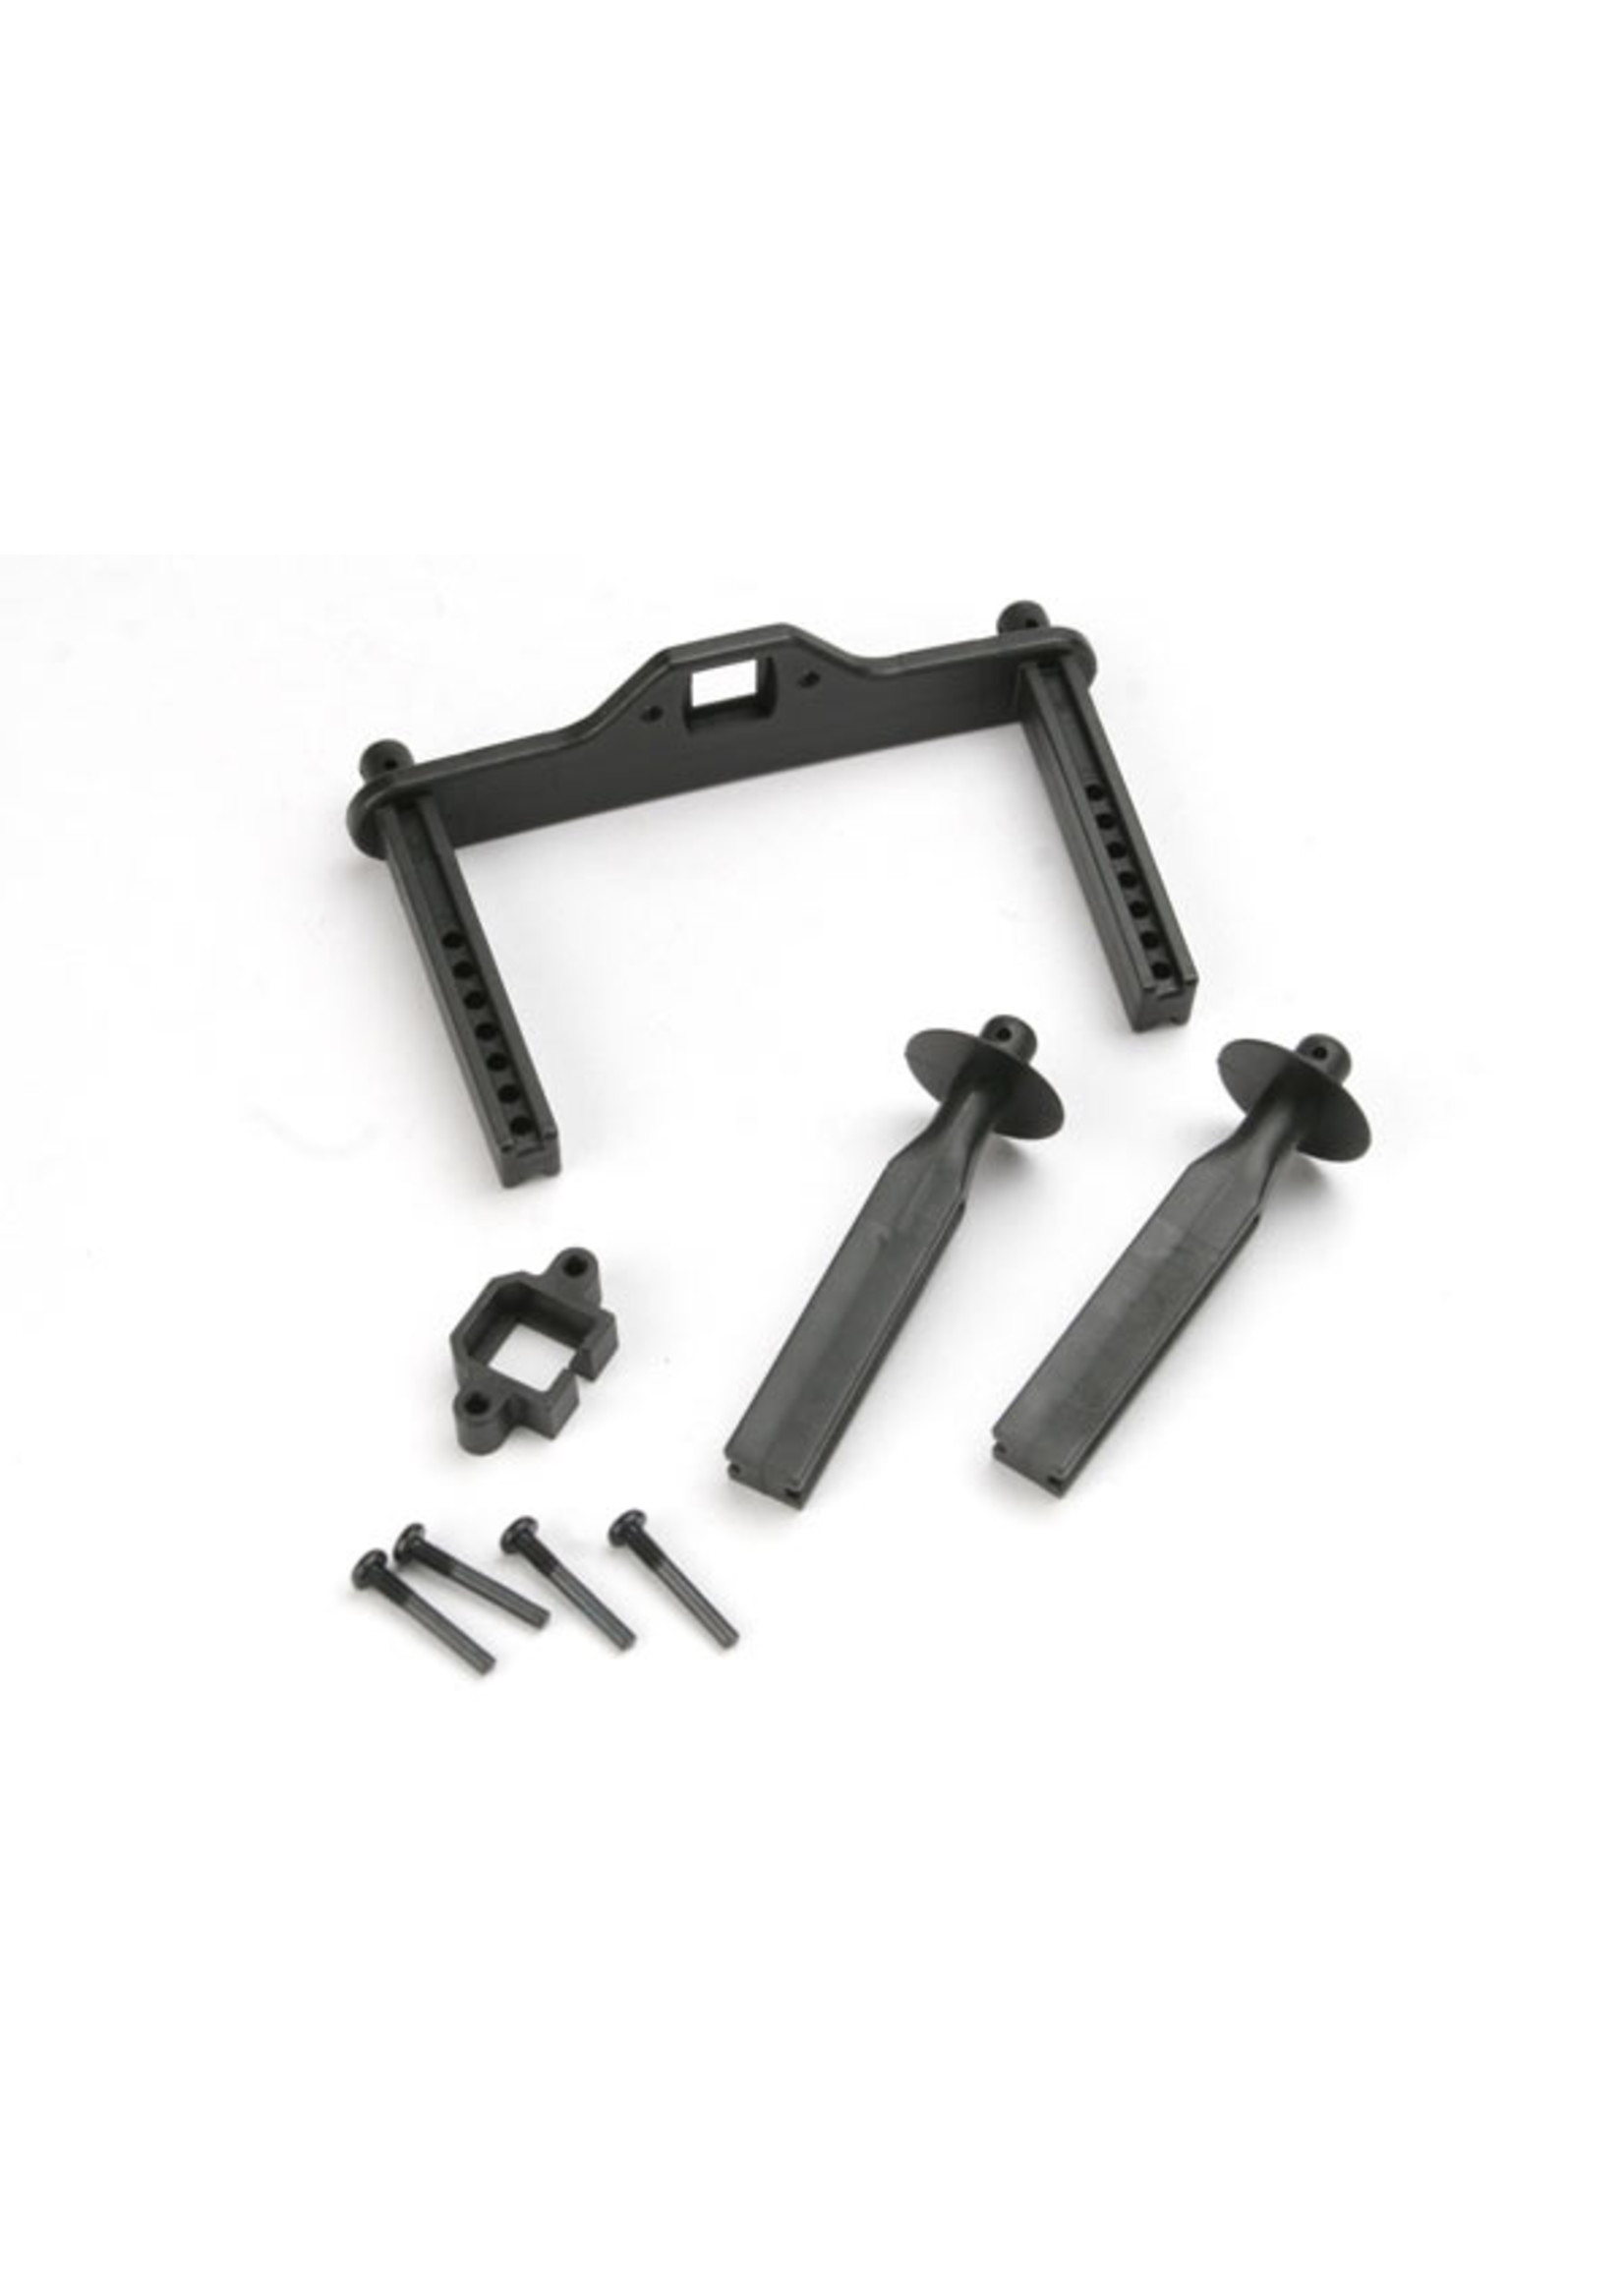 Traxxas 4914R - Body Mount Posts, Front & Rear